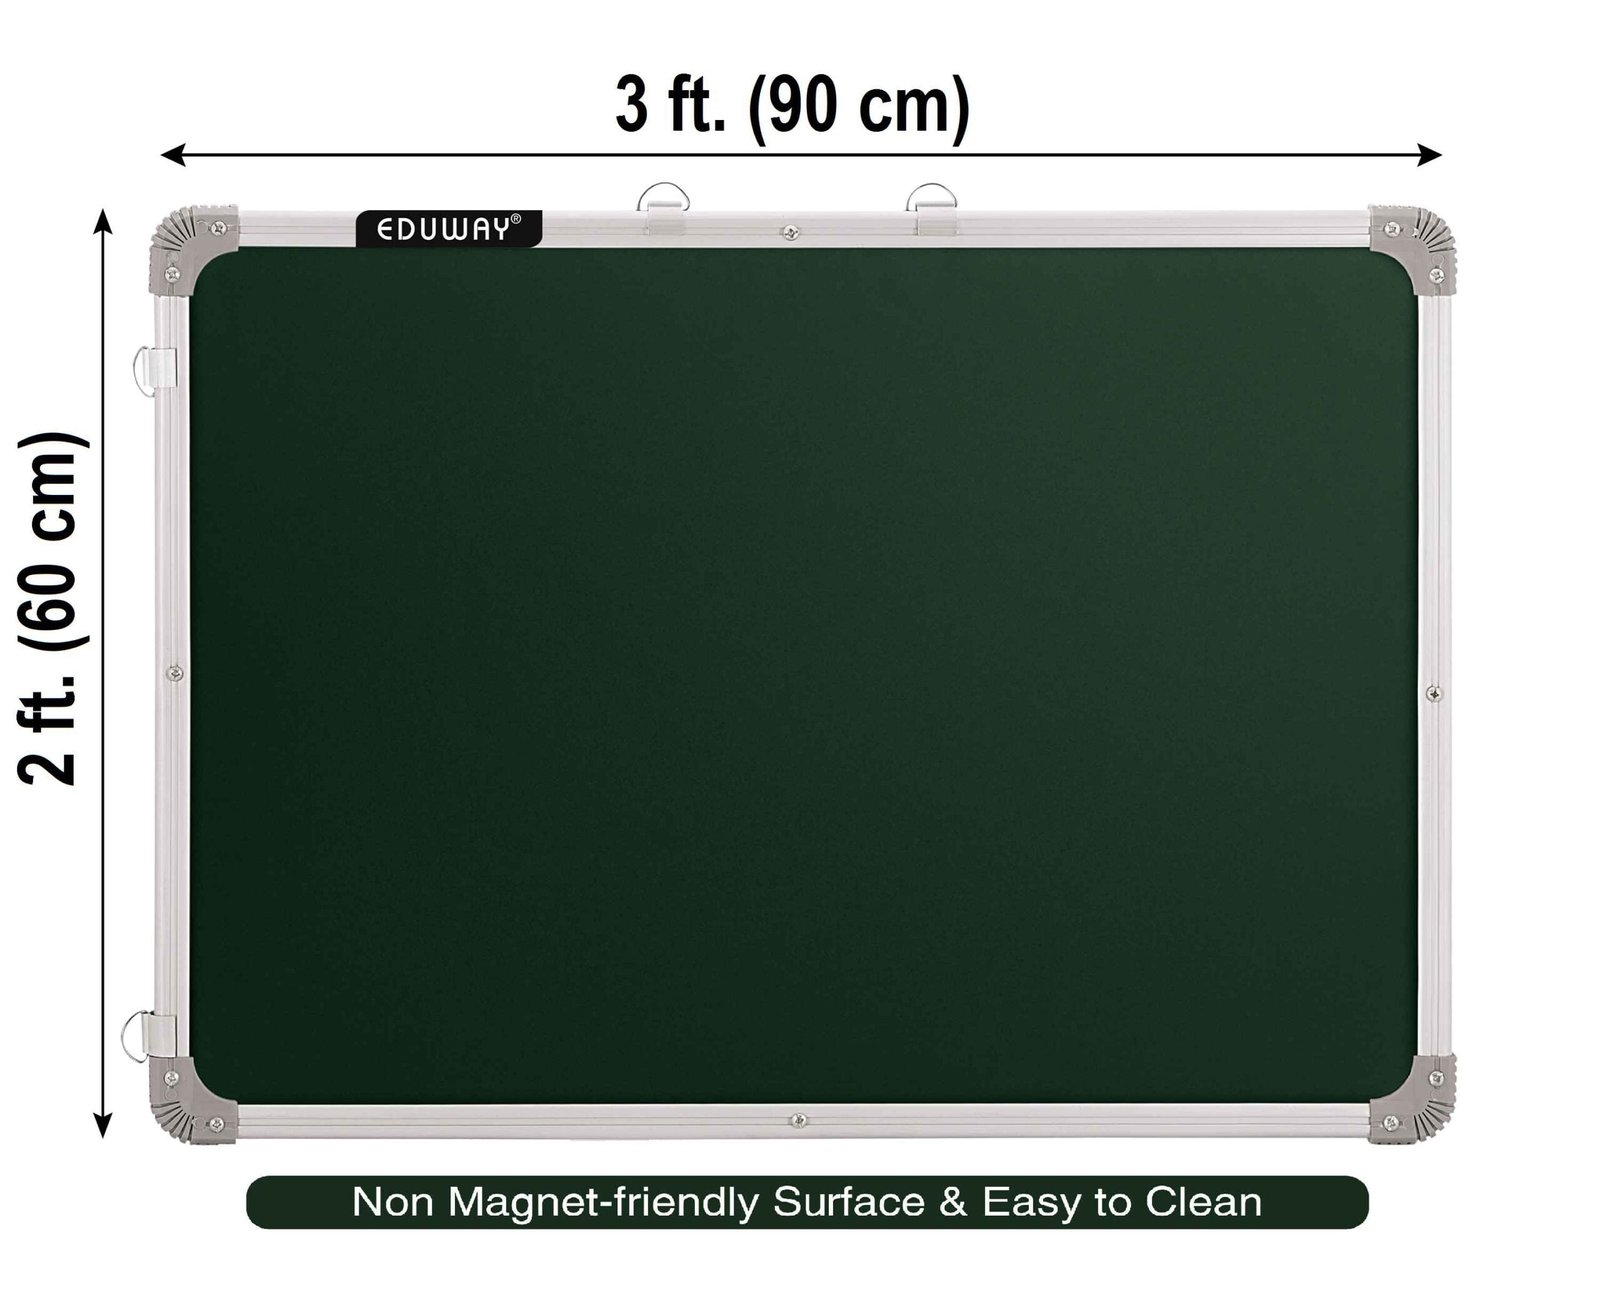 whiteboard marker board for teaching, school, and office use white-green surface 2x3 ft back view